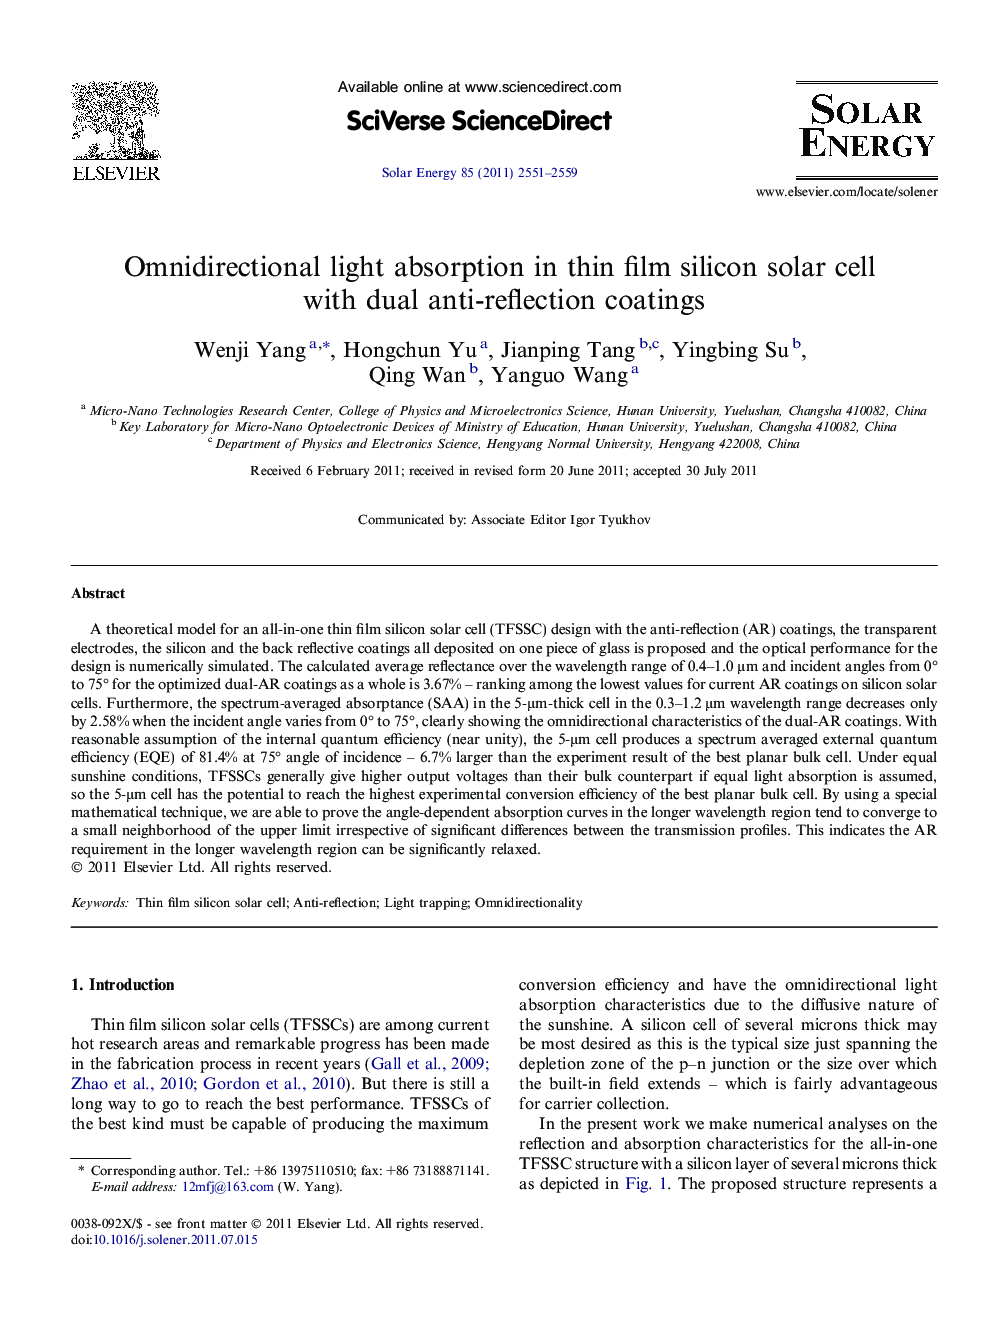 Omnidirectional light absorption in thin film silicon solar cell with dual anti-reflection coatings